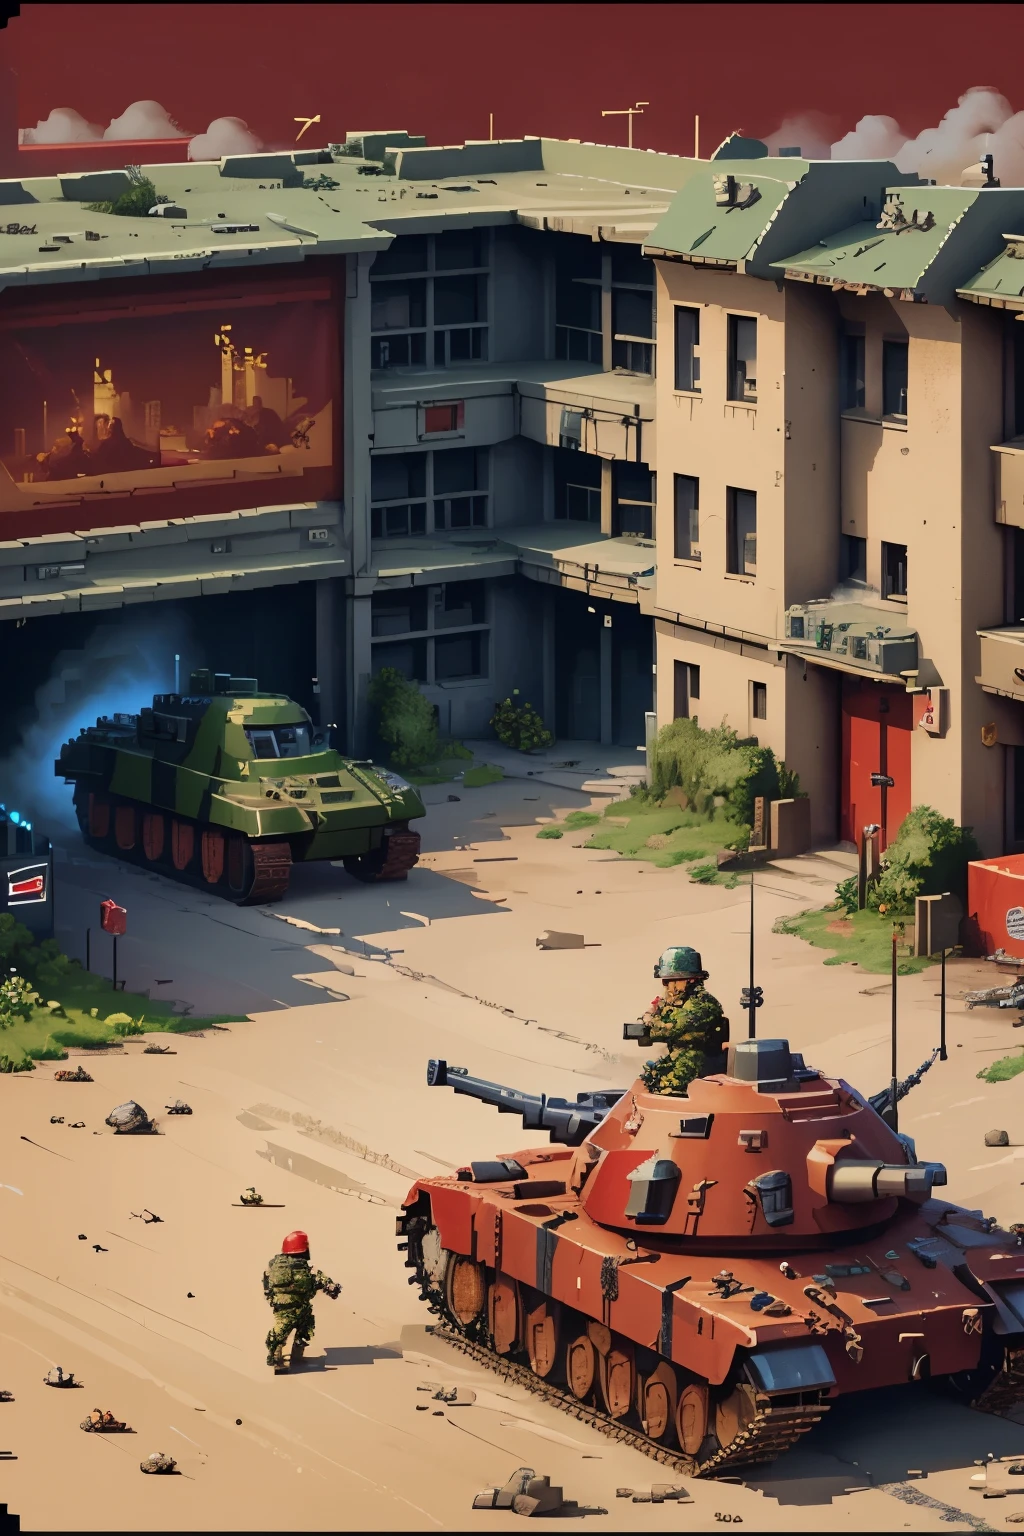 Pixel-art style, Command & Conquer: Red Alert, retro gaming, 8-bit graphics, detailed scenery, urban landscape, destroyed buildings, smoke rising, military vehicles, soldiers in uniform, futuristic weapons, intense battle, explosive action, vibrant colors, red alert, high contrast, pixel perfect.